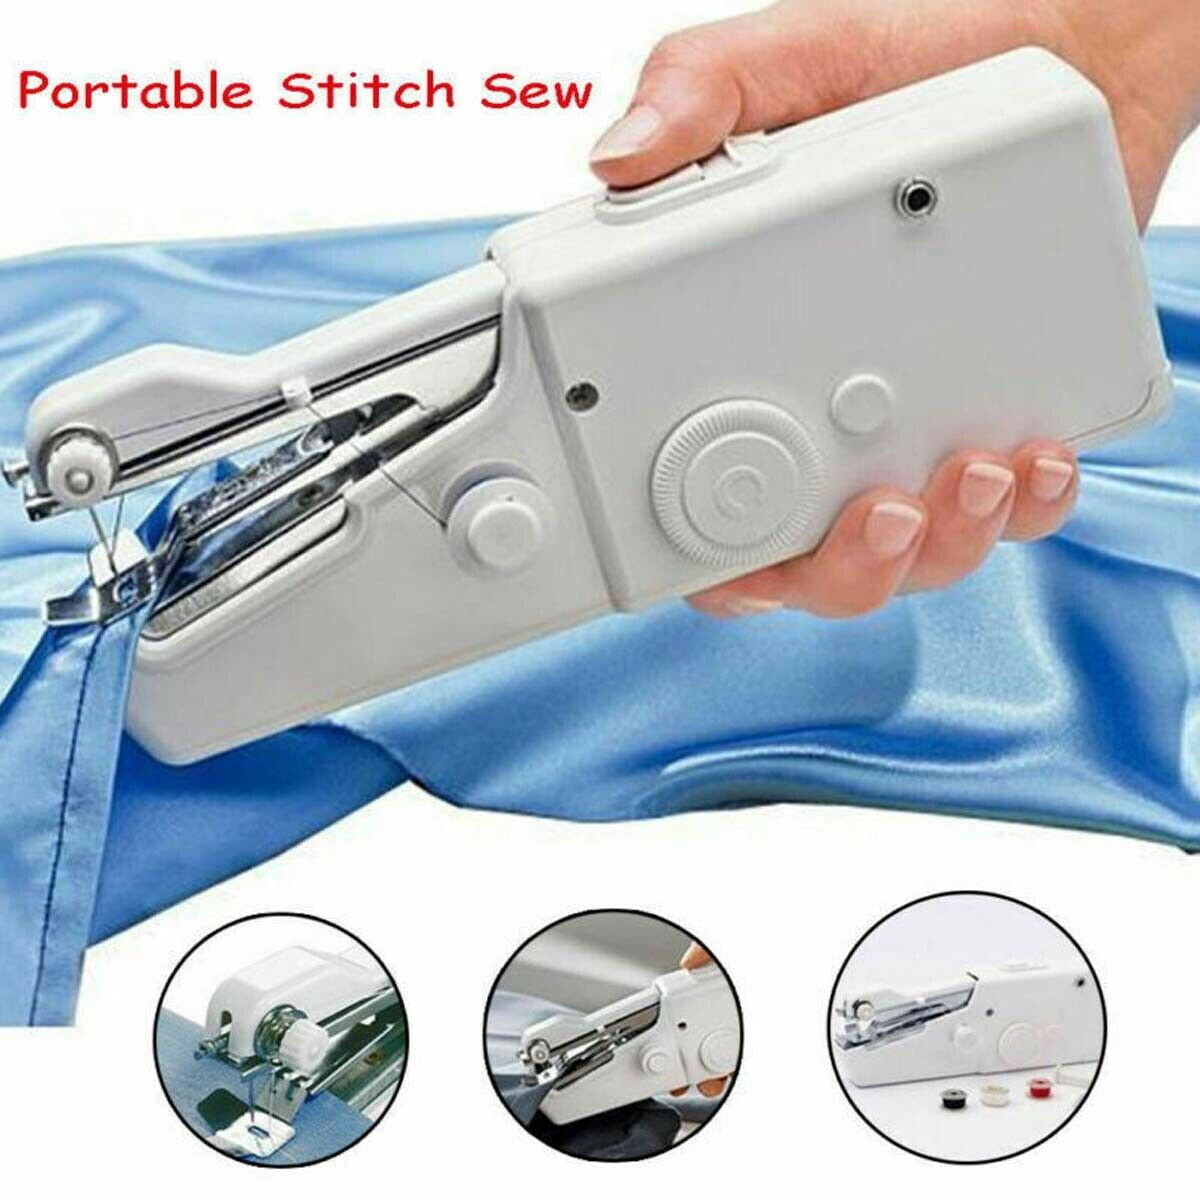 Acecoree 1pcs New Stitch Travel Household Electric Portable Mini Handheld Sewing Machine Sewing Machines 